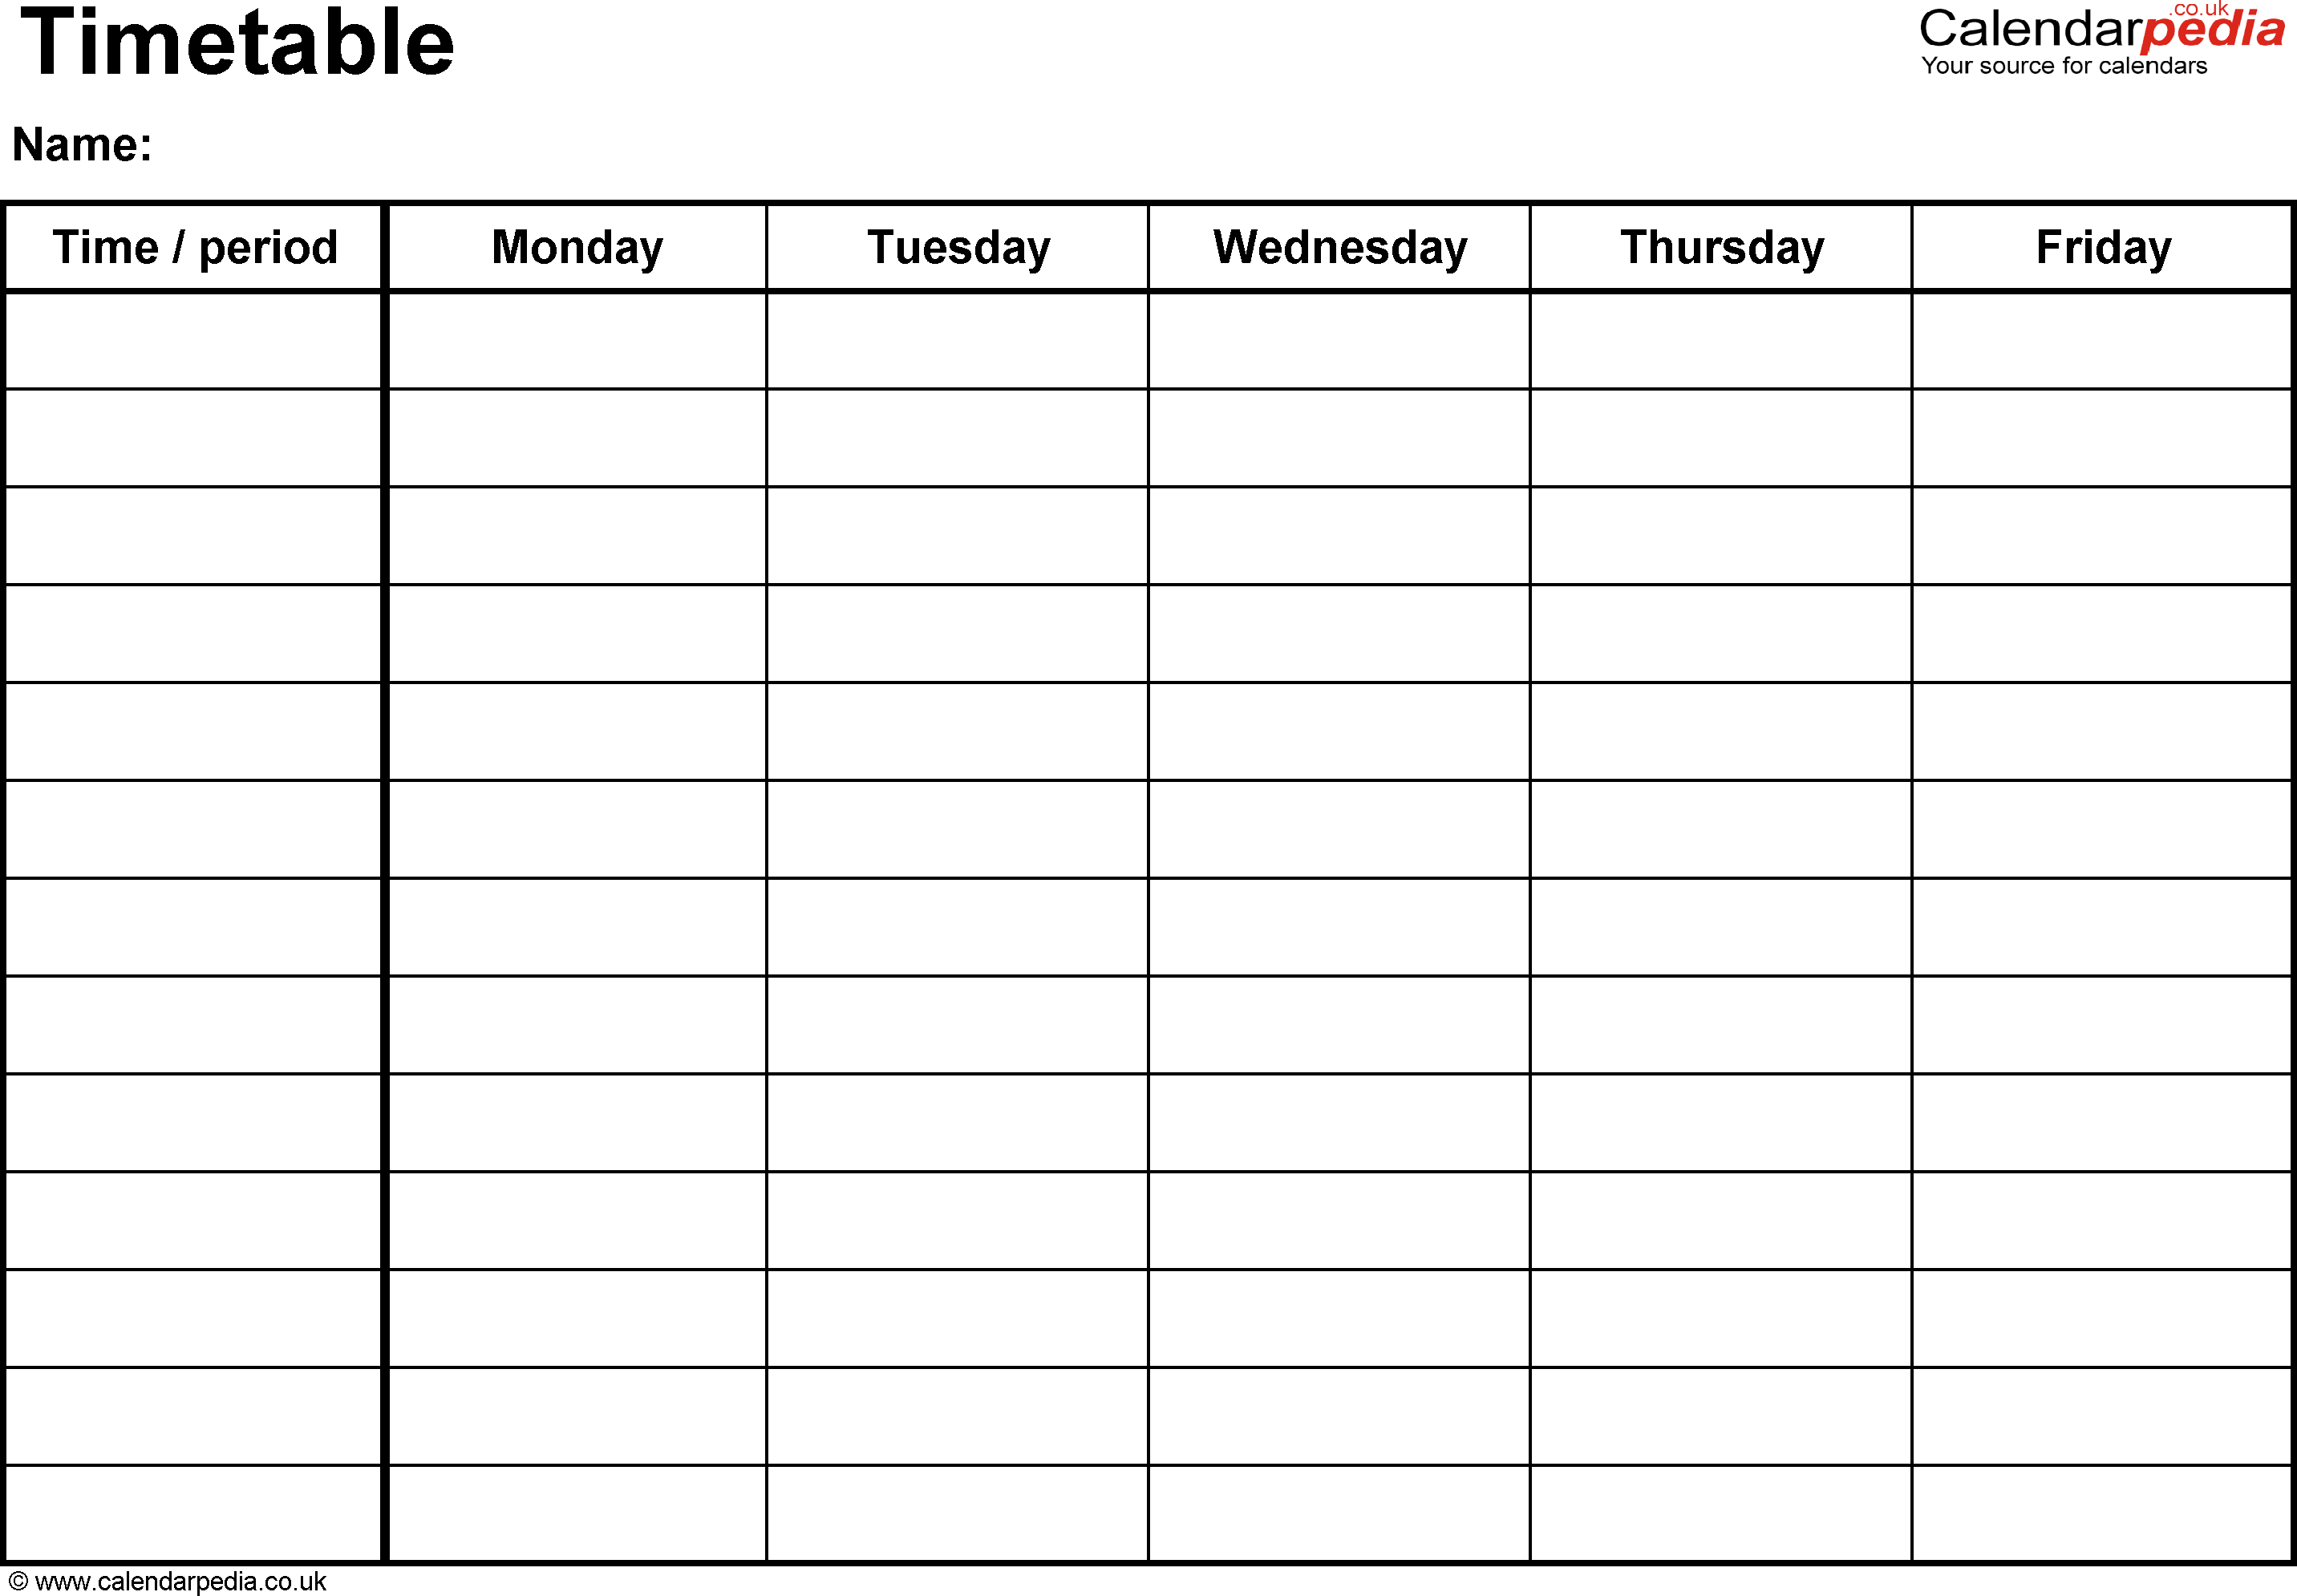 Free Printable Schedule Maker | Template Business Psd, Excel for Calendar Maker Free Printable